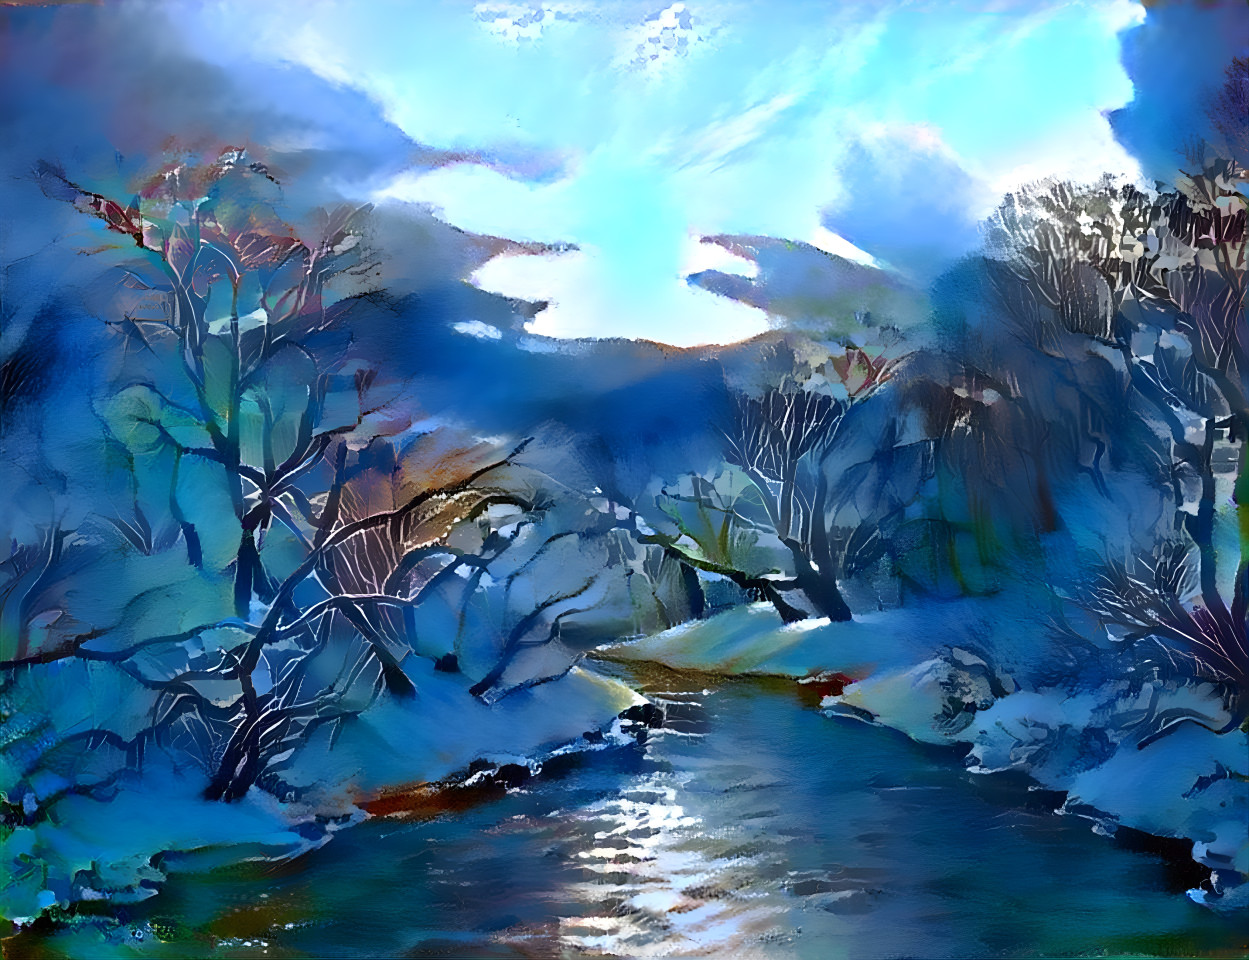 "Icy Stream" - by Unreal.